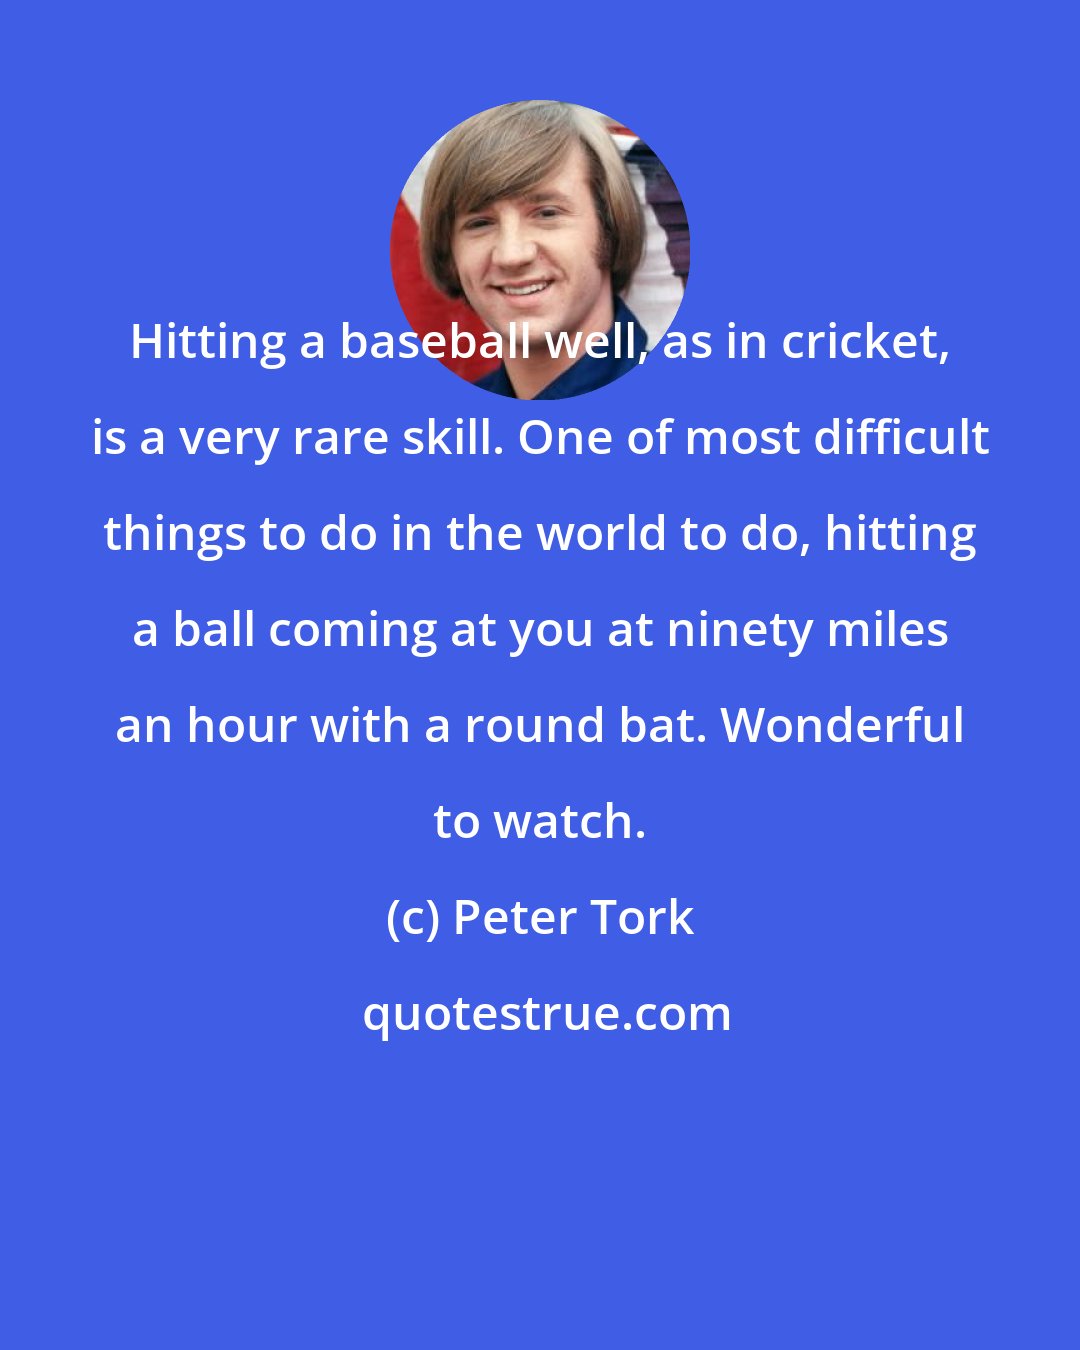 Peter Tork: Hitting a baseball well, as in cricket, is a very rare skill. One of most difficult things to do in the world to do, hitting a ball coming at you at ninety miles an hour with a round bat. Wonderful to watch.